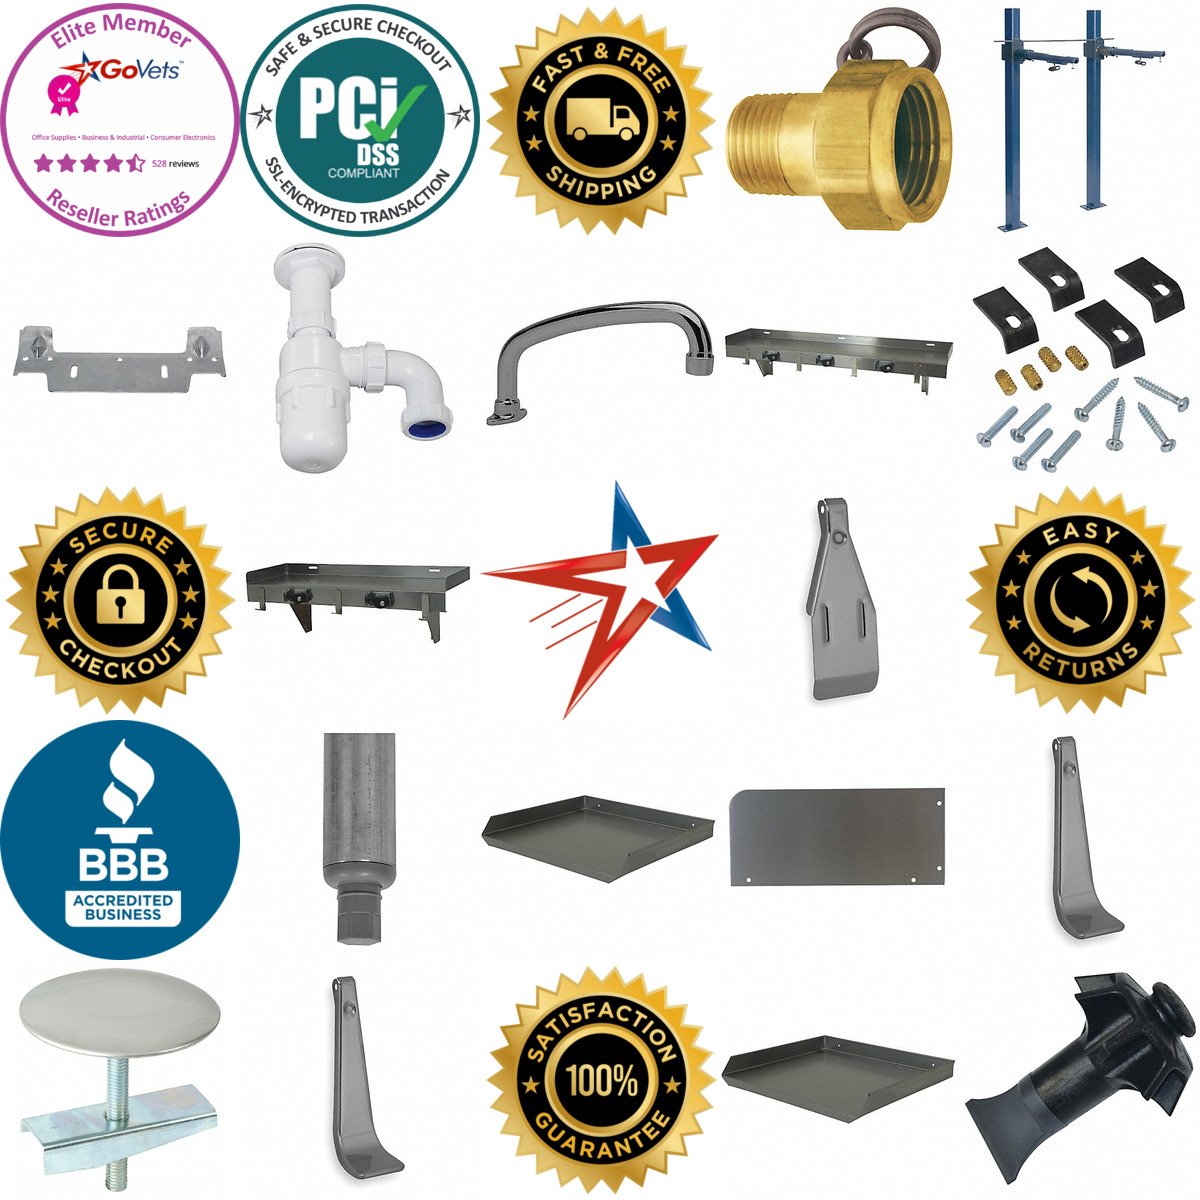 A selection of Fixtures products on GoVets